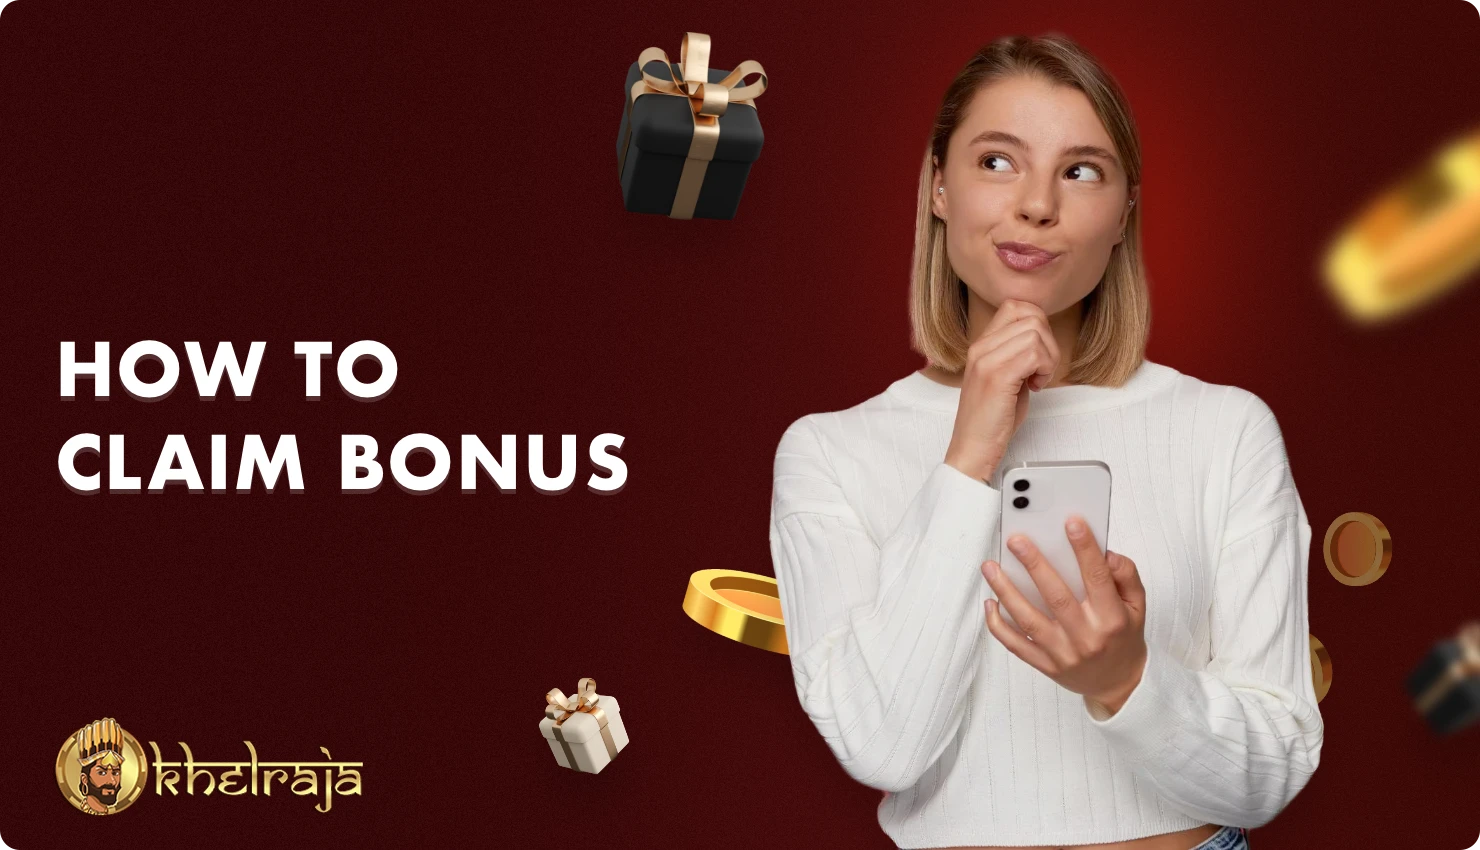 In order to receive the Khelraja bonus, you must meet several conditions